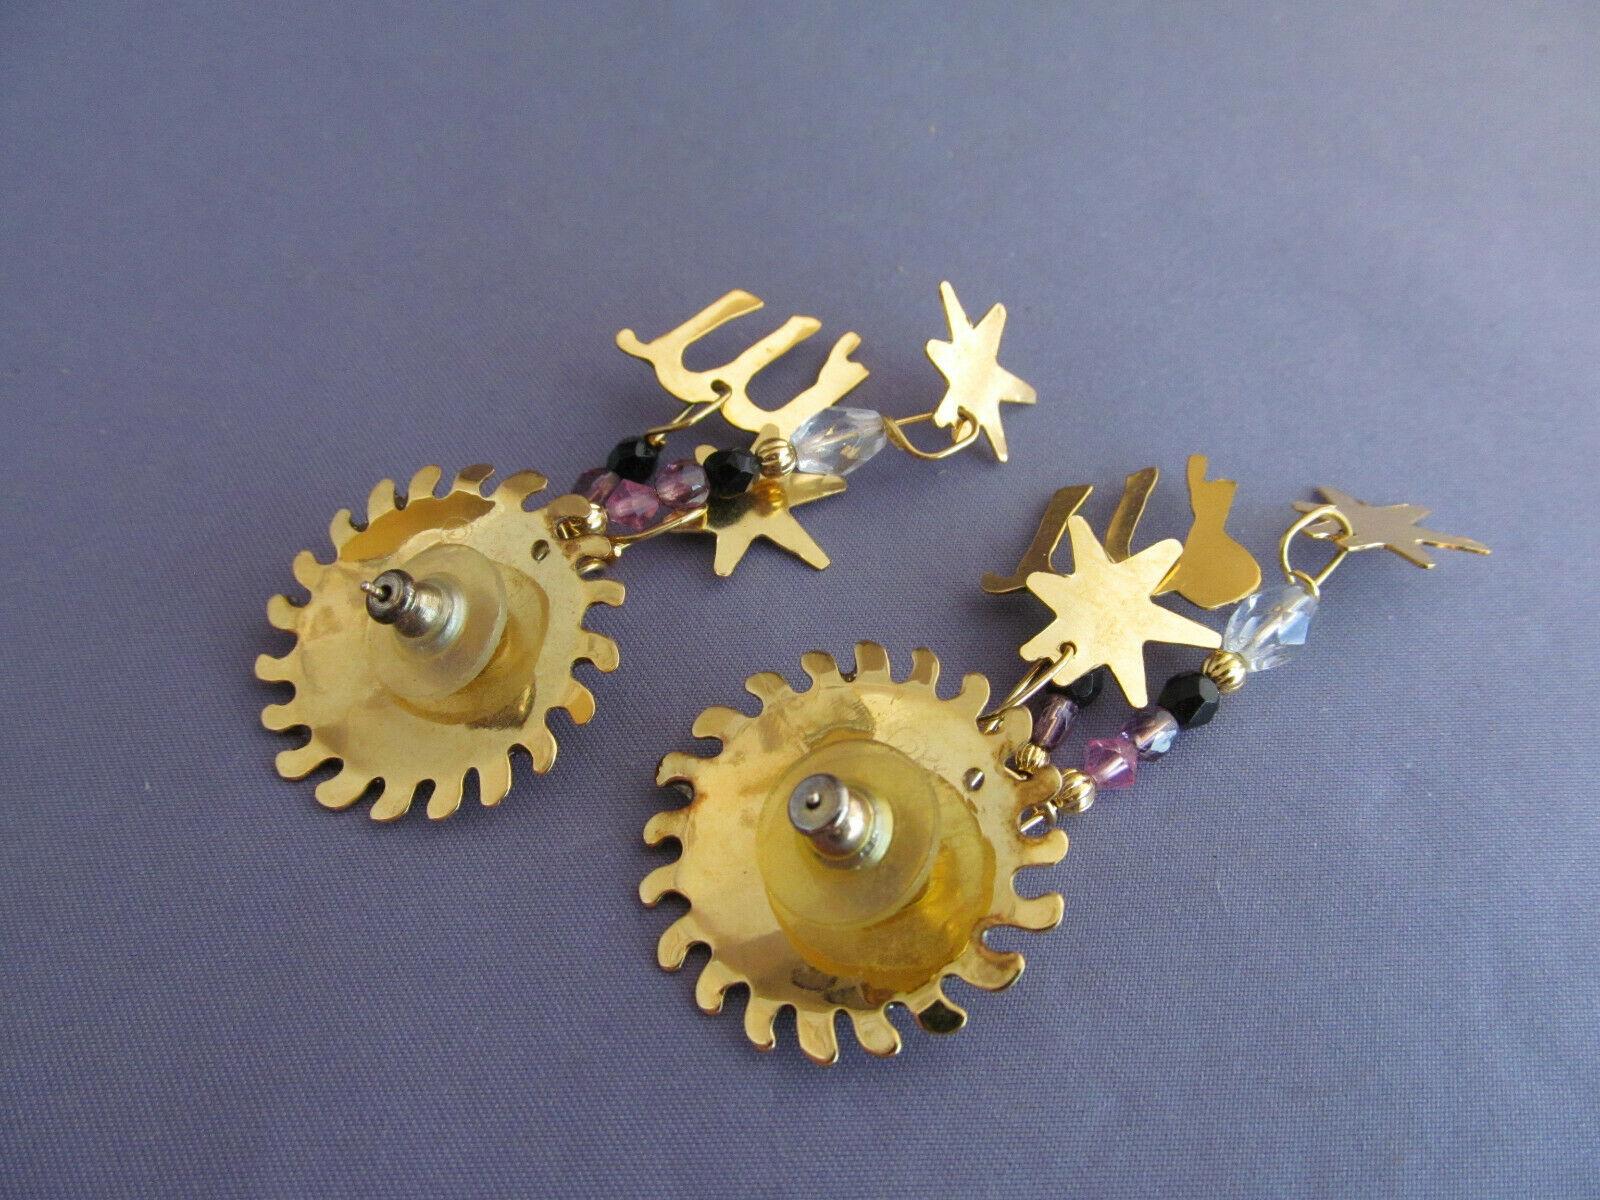 Large Enamel Celestial Sun Charm Designer Pierced Dangle Earrings; signed: LUNCH AT THE RITZ; These “Fun in the Sun” Earrings epitomize vintage charm and personality! Measuring approx. 2.75